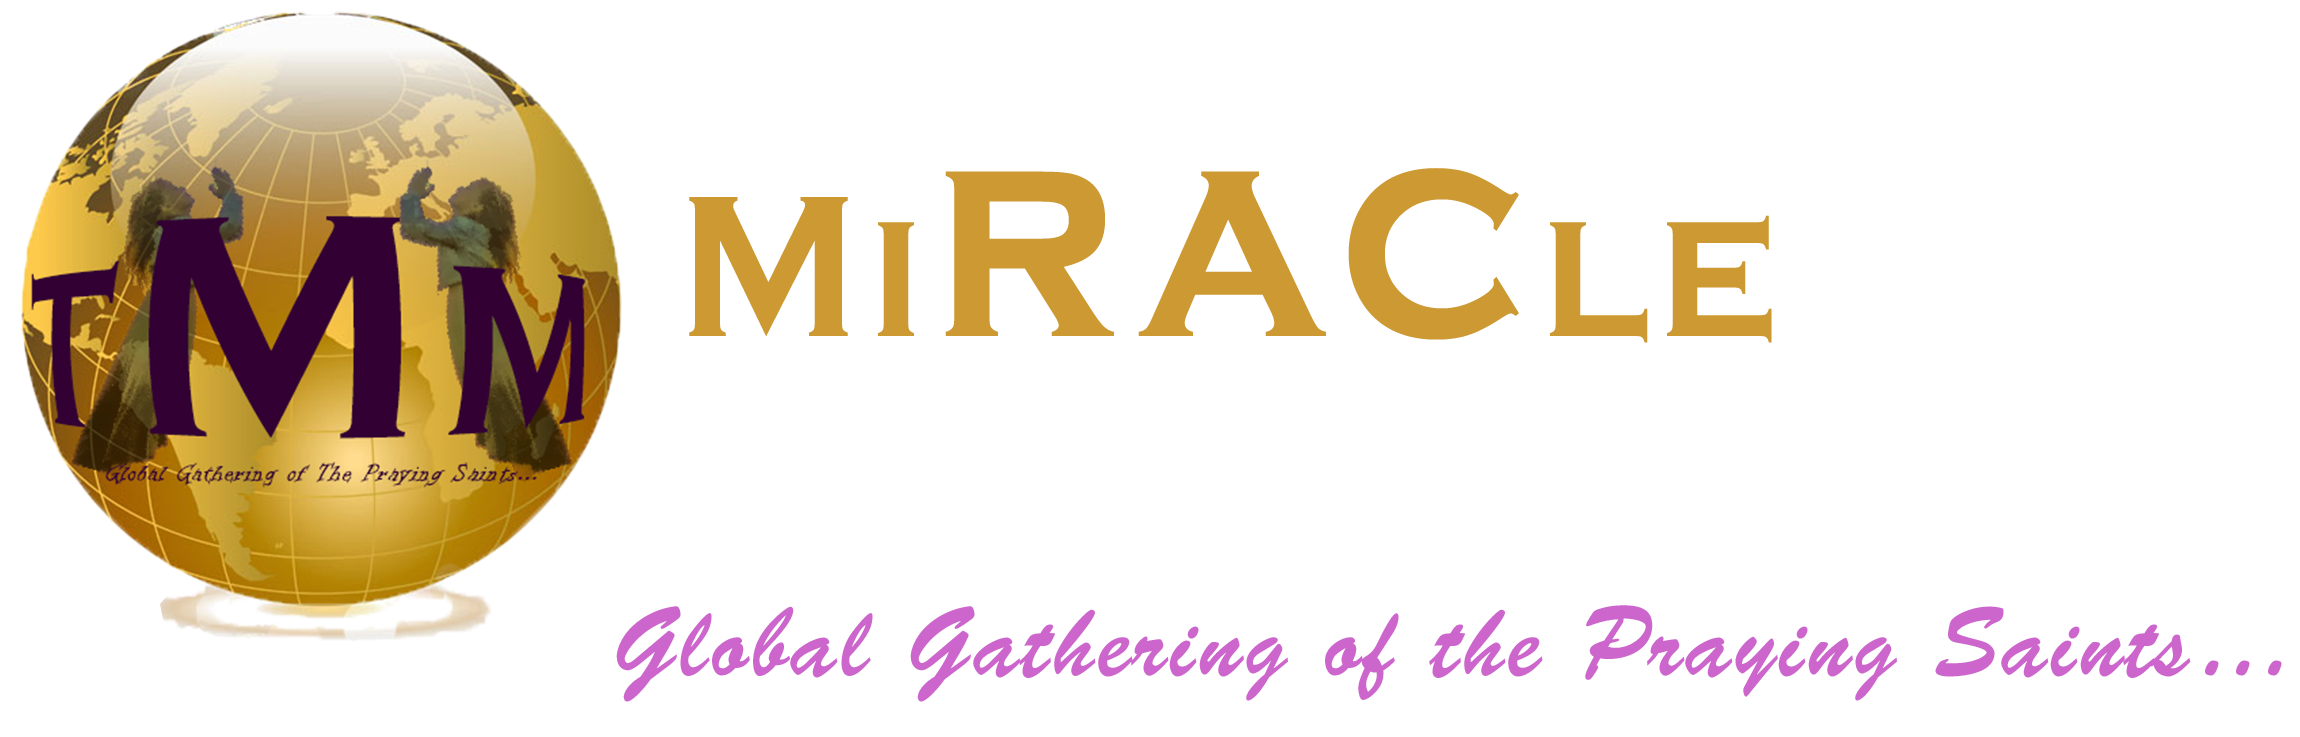 The Miracle Movement